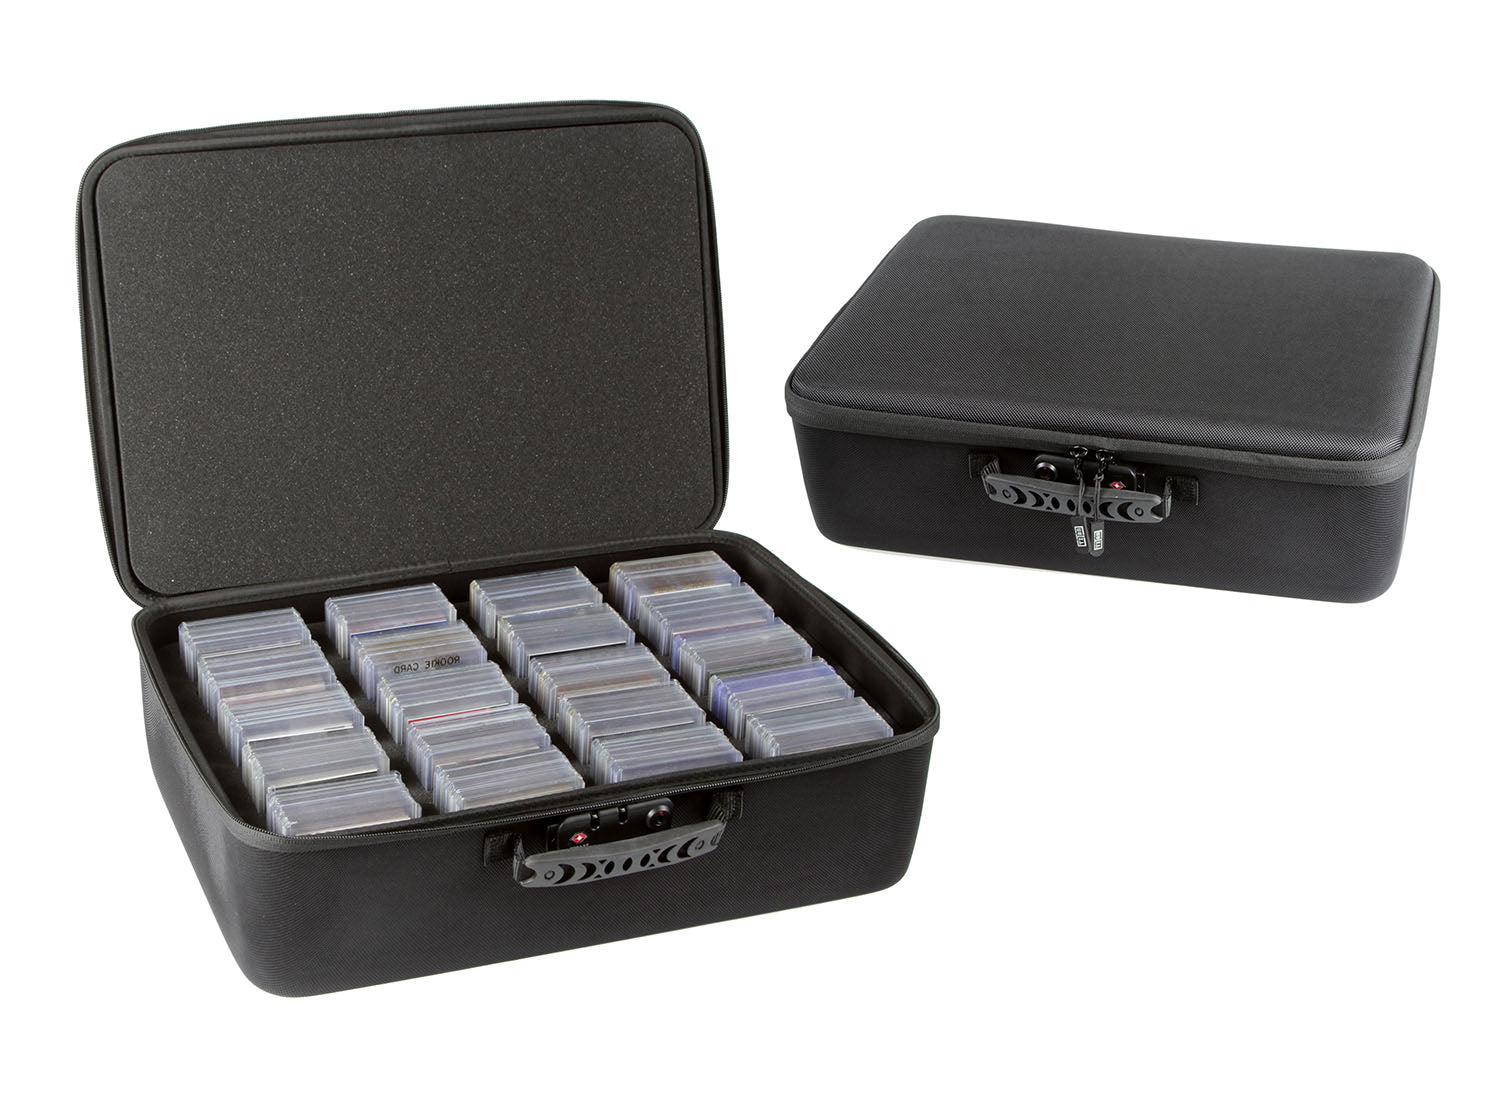 Card Titan Pro Toploader Storage Box and One Touch Sports Card Storage Case  with Zipper Lock - Trading Card Storage Box Fits up to 400 Standard 35pt